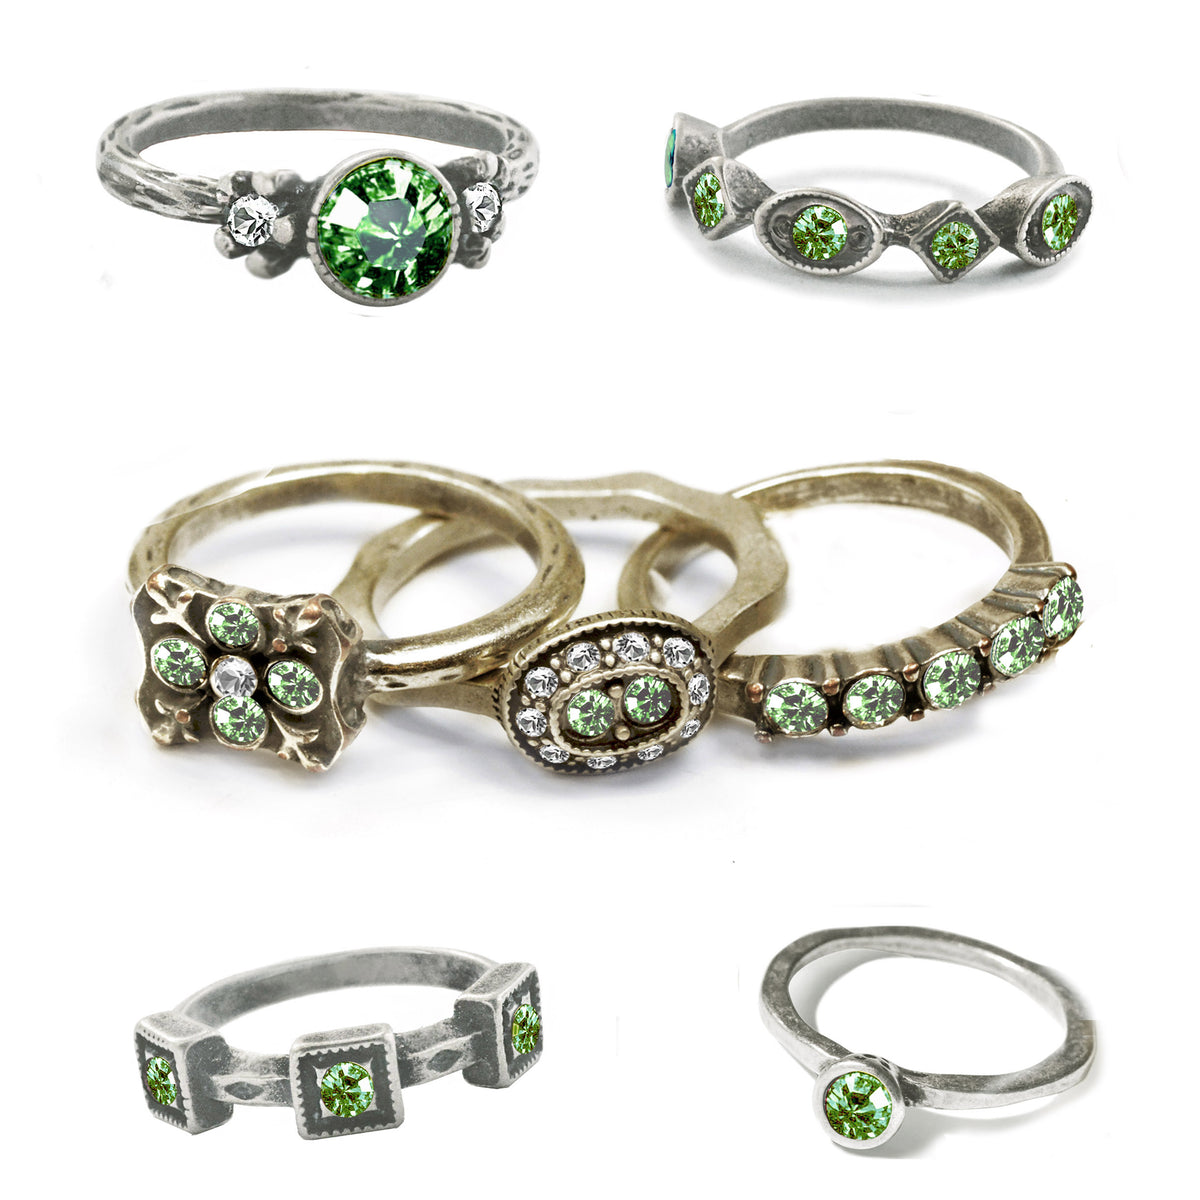 Stackable August Birthstone Ring - Peridot Green